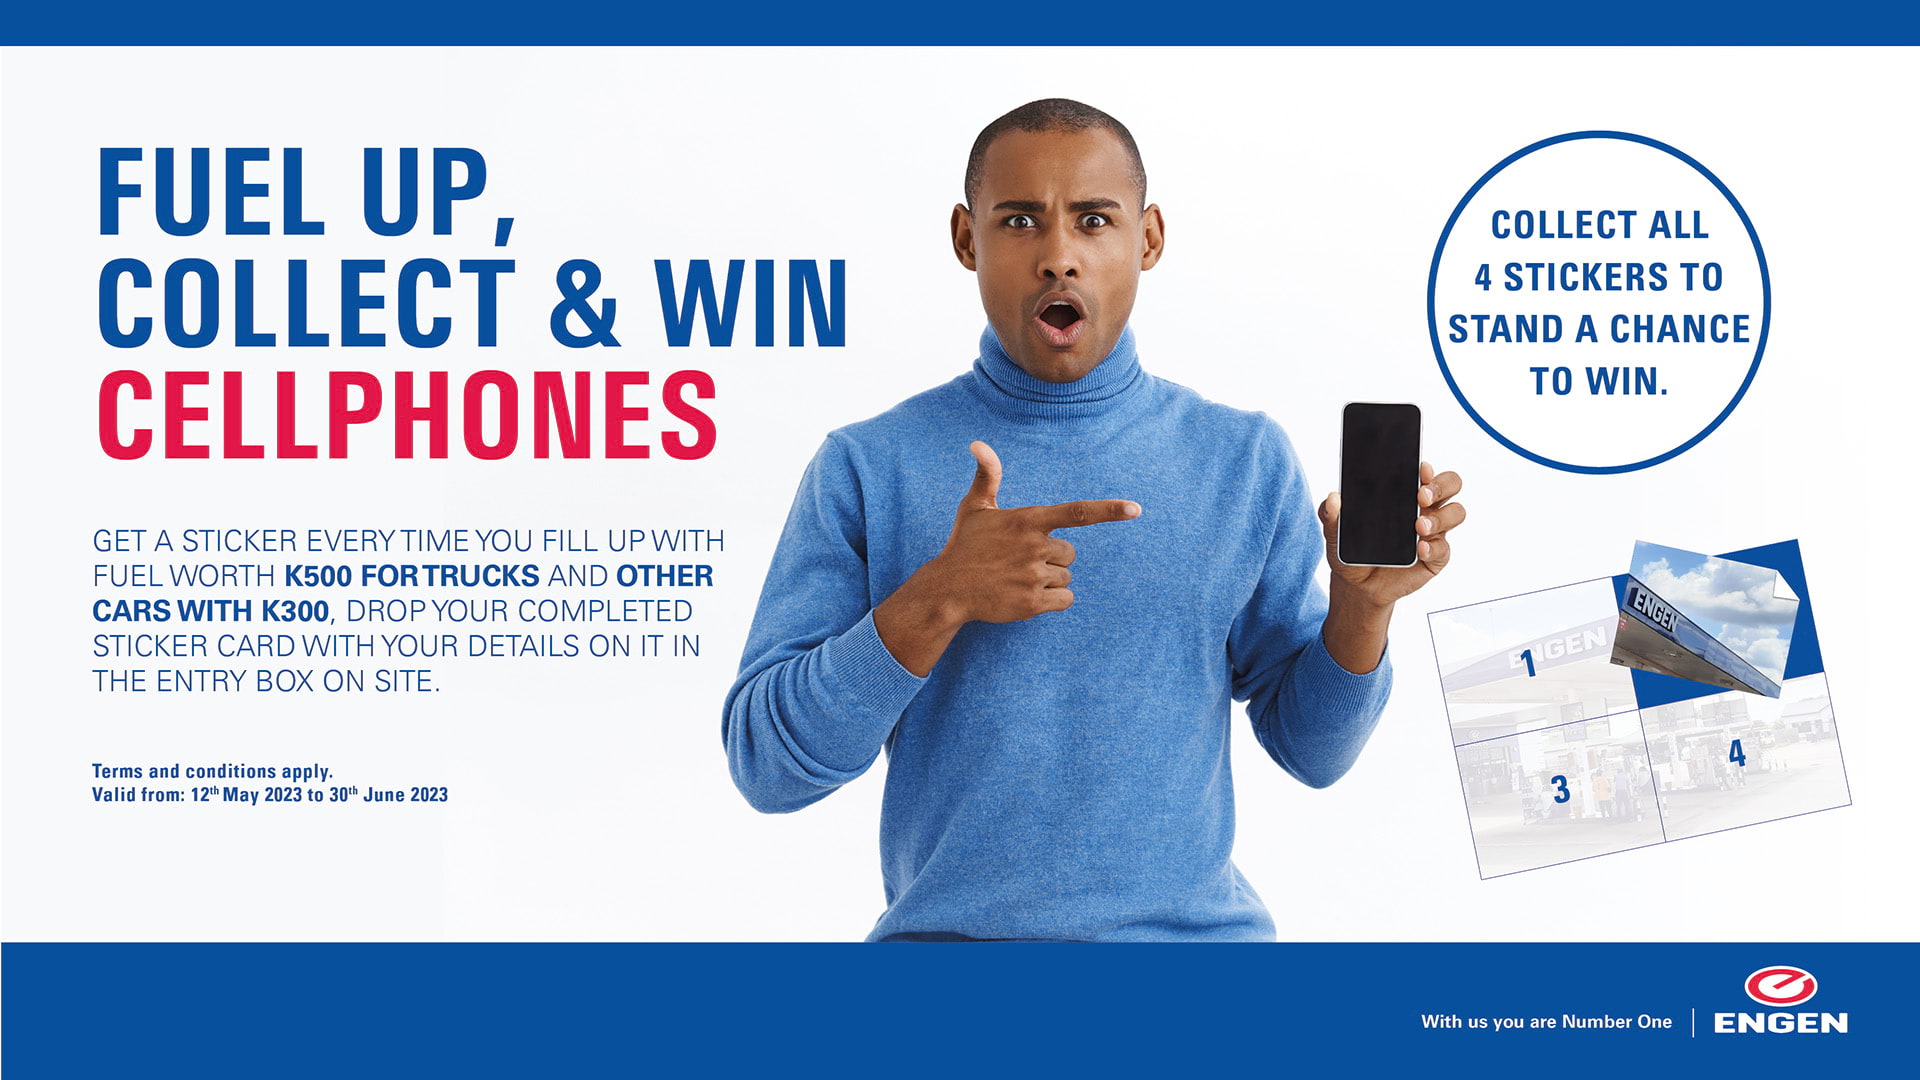 A man pointing to his cellphone with text "Fuel Up, Collect & Win Cellphones"